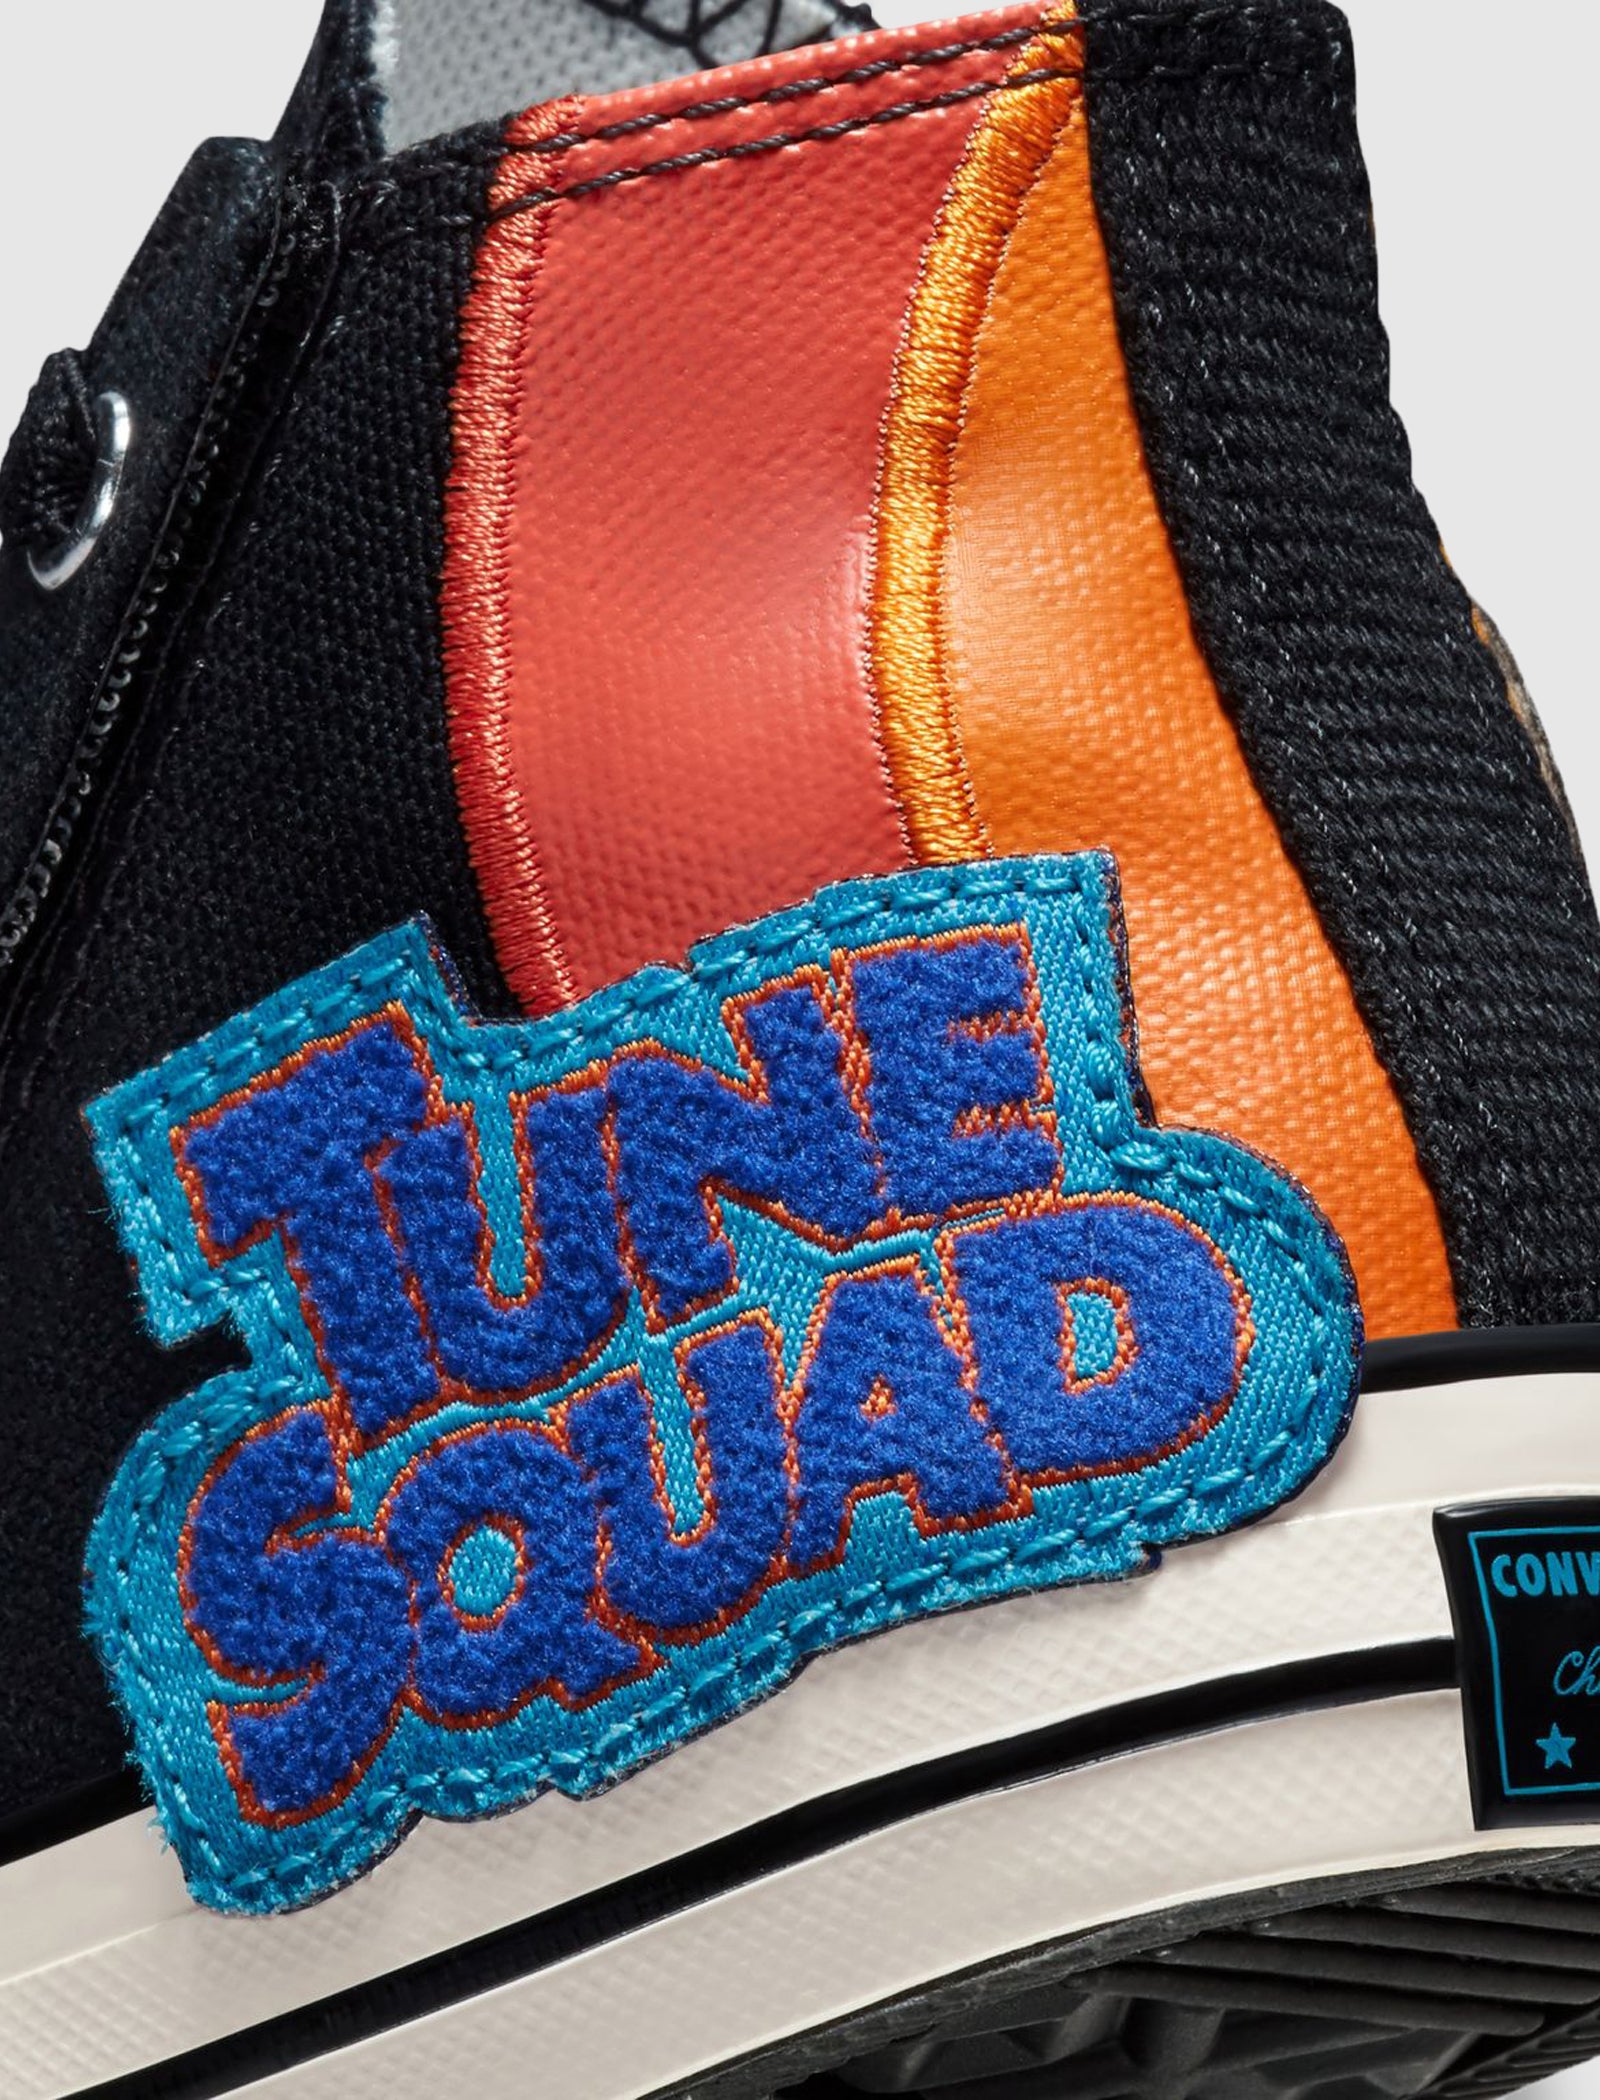 SPACE JAM CHUCK TAYLOR 70 "TUNE SQUAD" TD